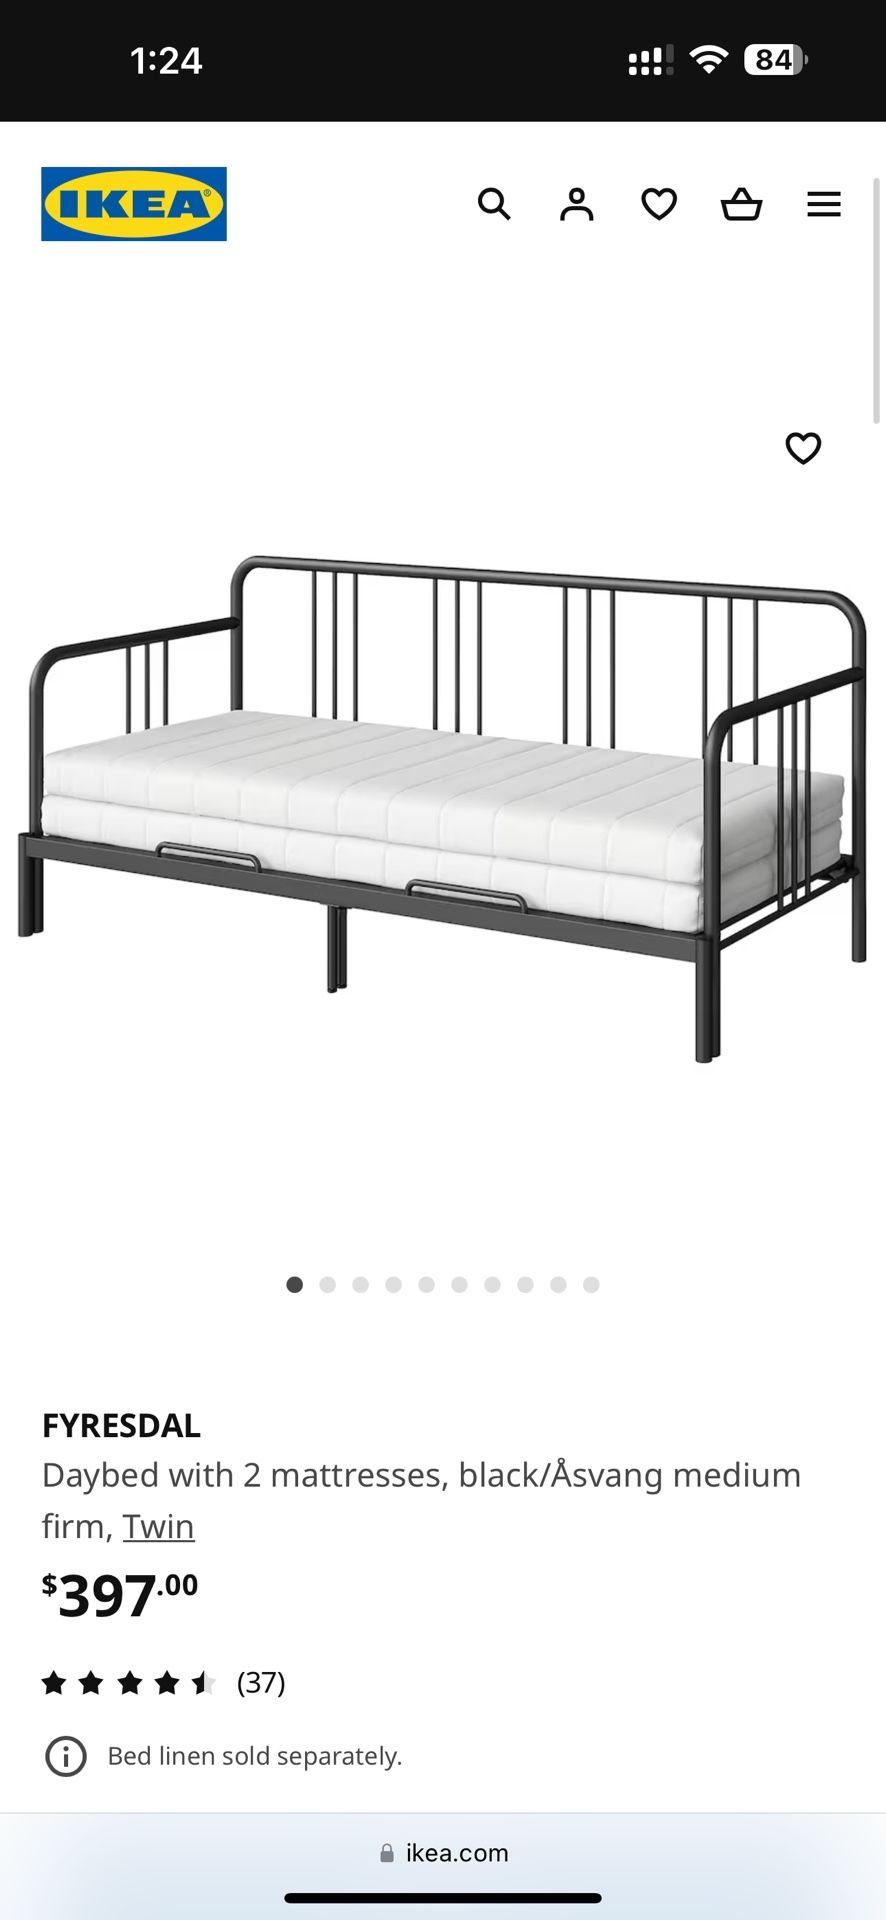 Ikea Daybed with 2 Mattresses